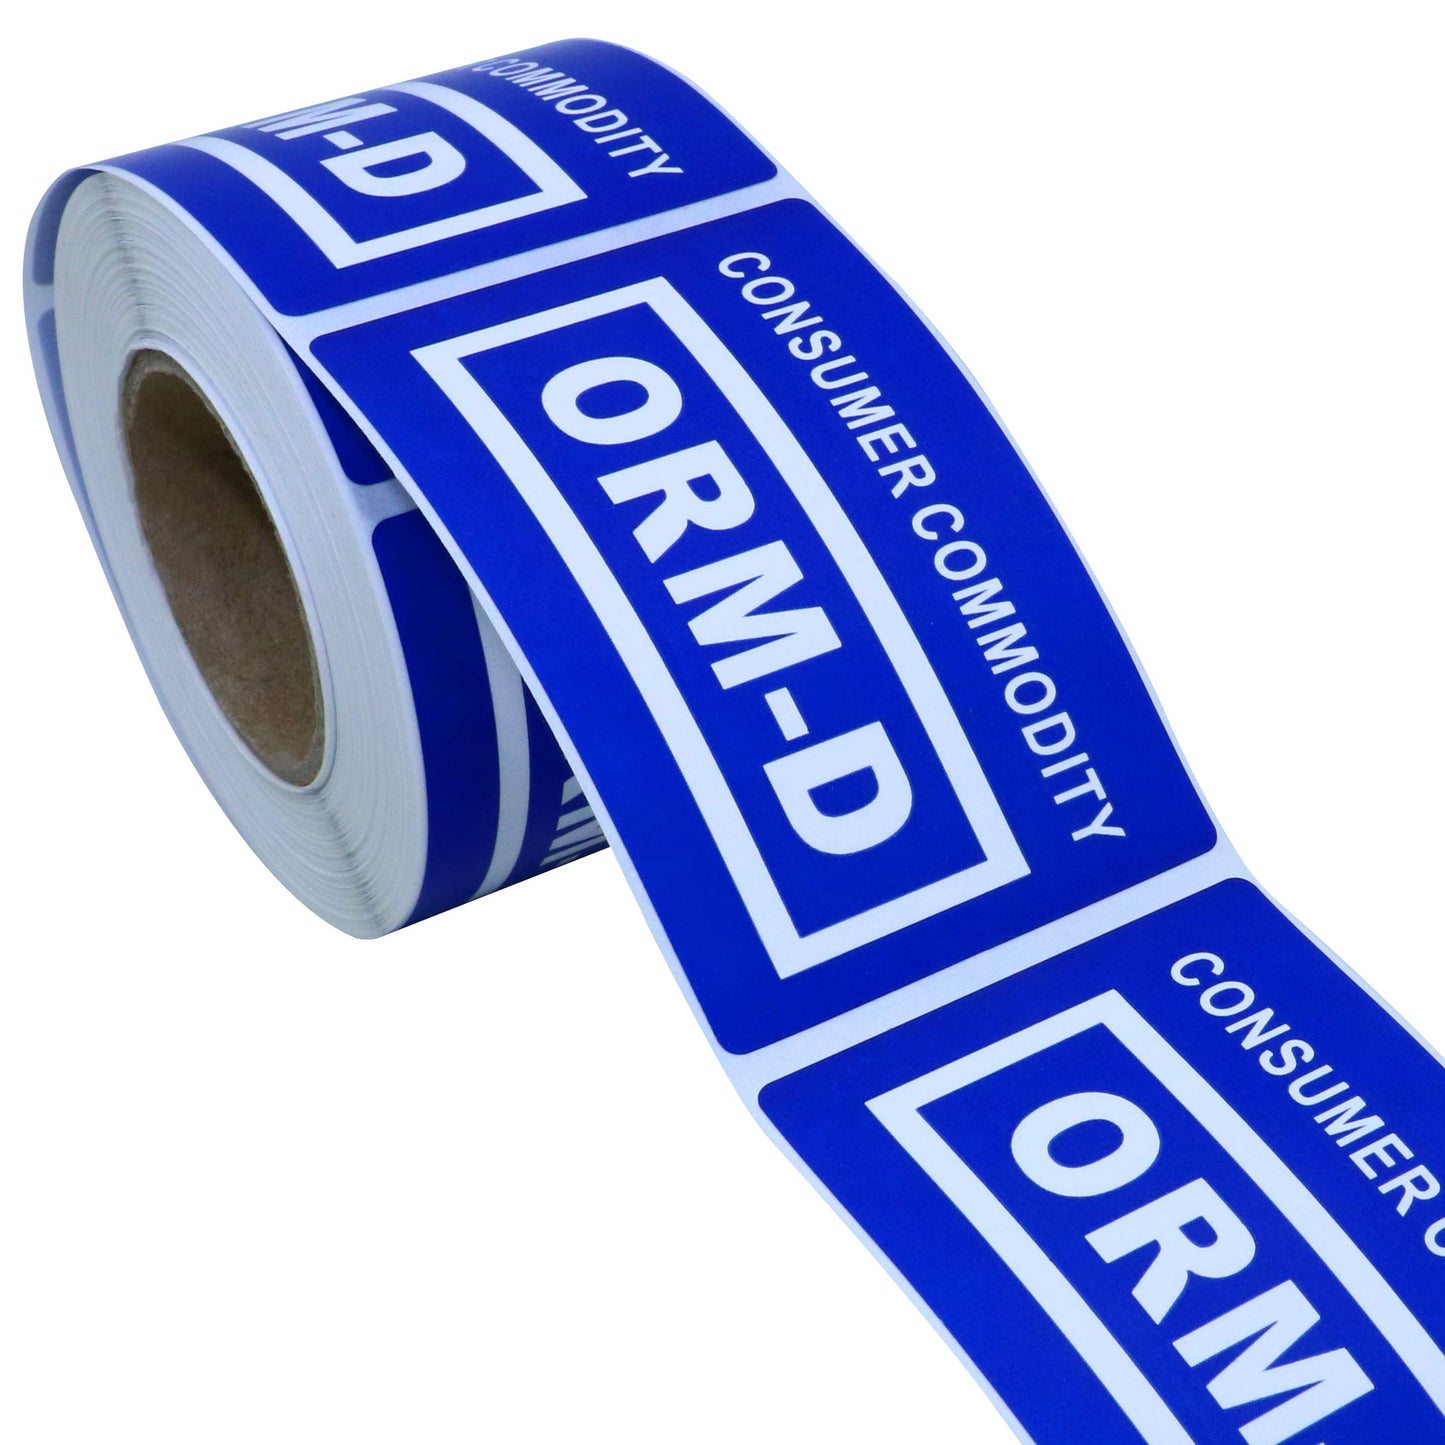 Hybsk 1" x 2" Blue "Consumer Commodity ORM-D" Label Total 500 Labels Per Roll